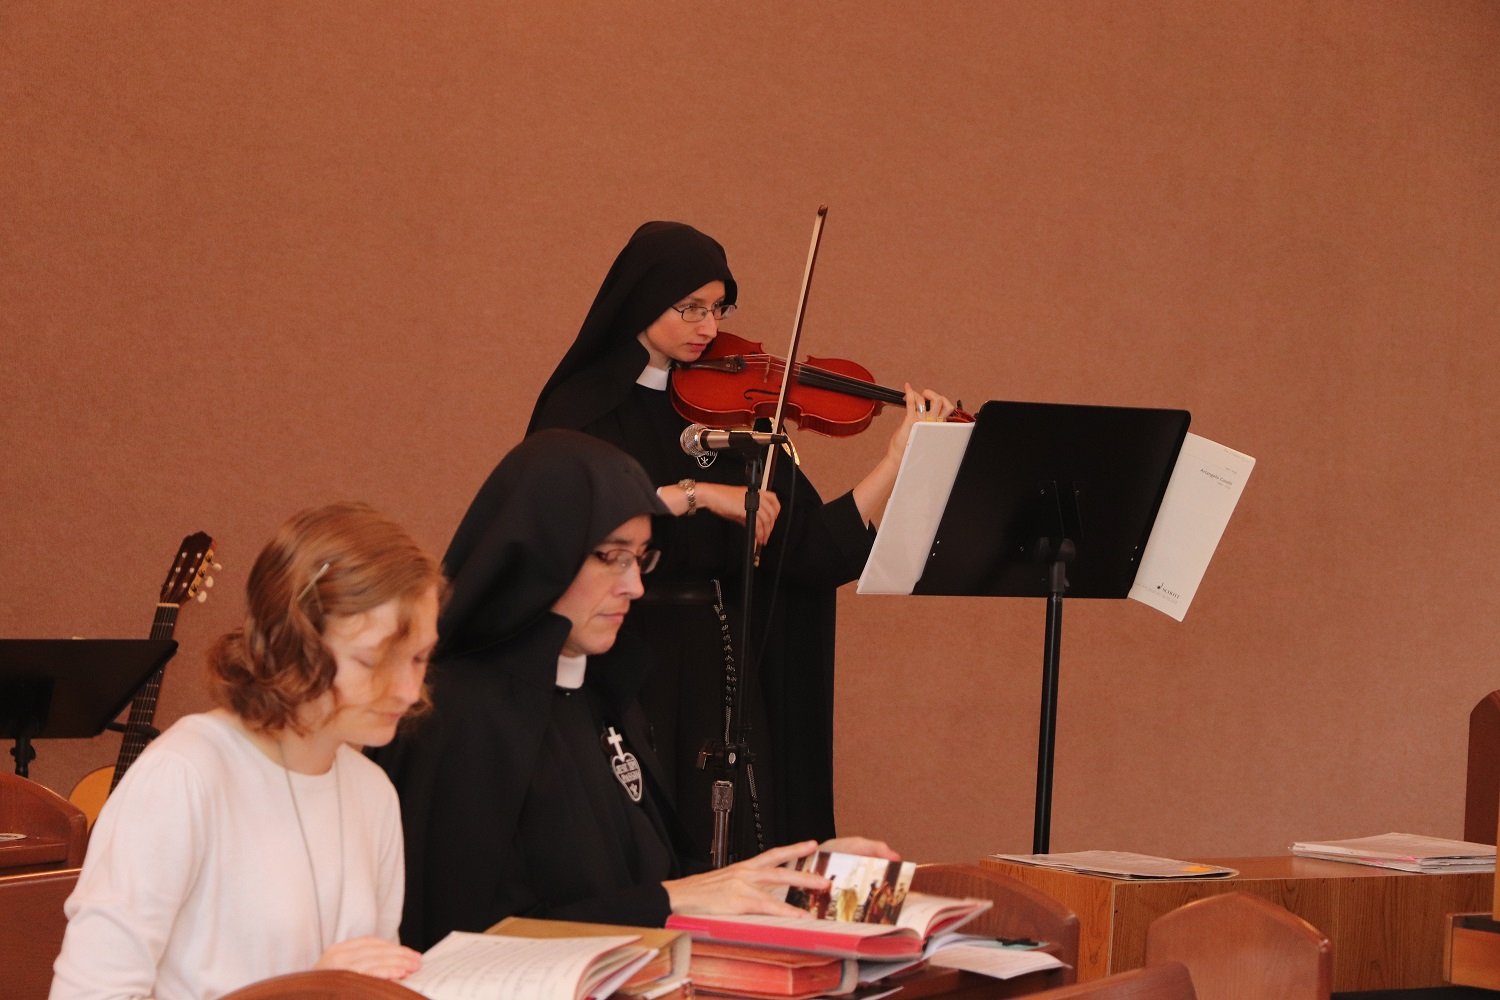  Sr. Cecilia Maria (on violin) and Sr. Maria Faustina (on organ) played an instrumental version of “In Perfect Charity” after Holy Communion.  In the foreground, Mother John Mary kneels next to our new Aspirant, Emma! 